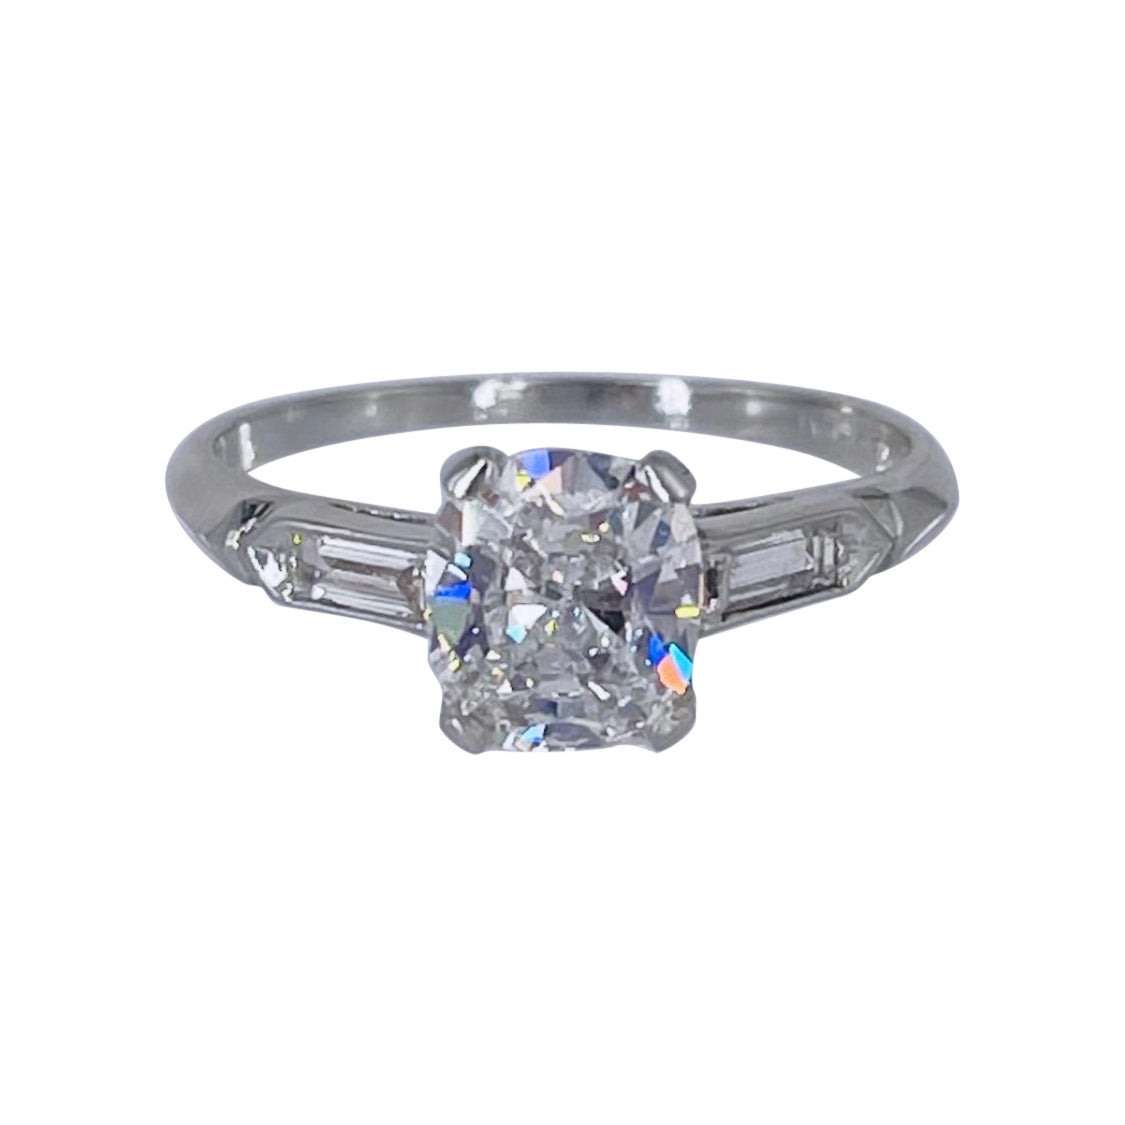 This sparkling engagement ring by J. Birnbach is a charming piece inspired by the Art Deco period. The ring features a 0.92 carat cushion brilliant diamond certified by GIA to be H color and SI1 clarity. The center diamond is accented by two